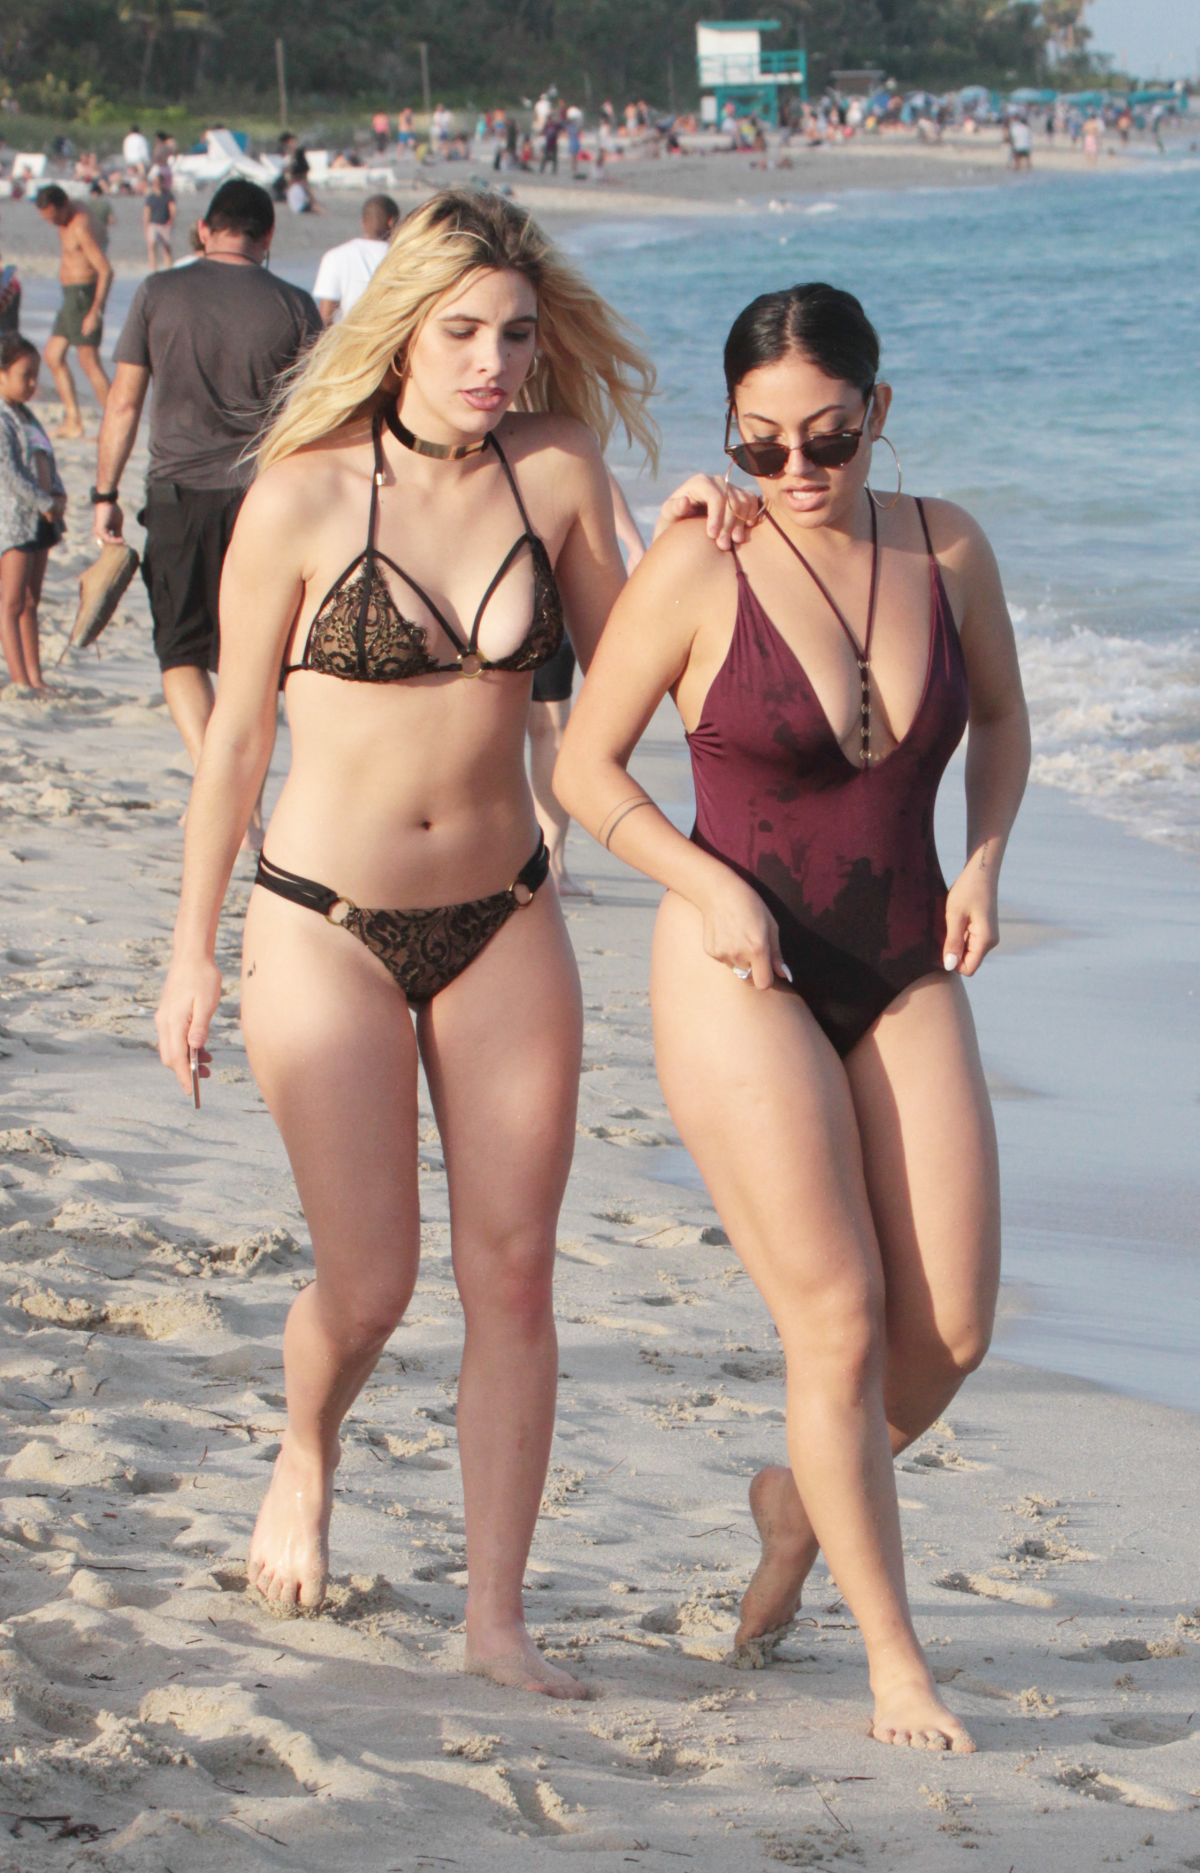 Lele Pons And Inanna